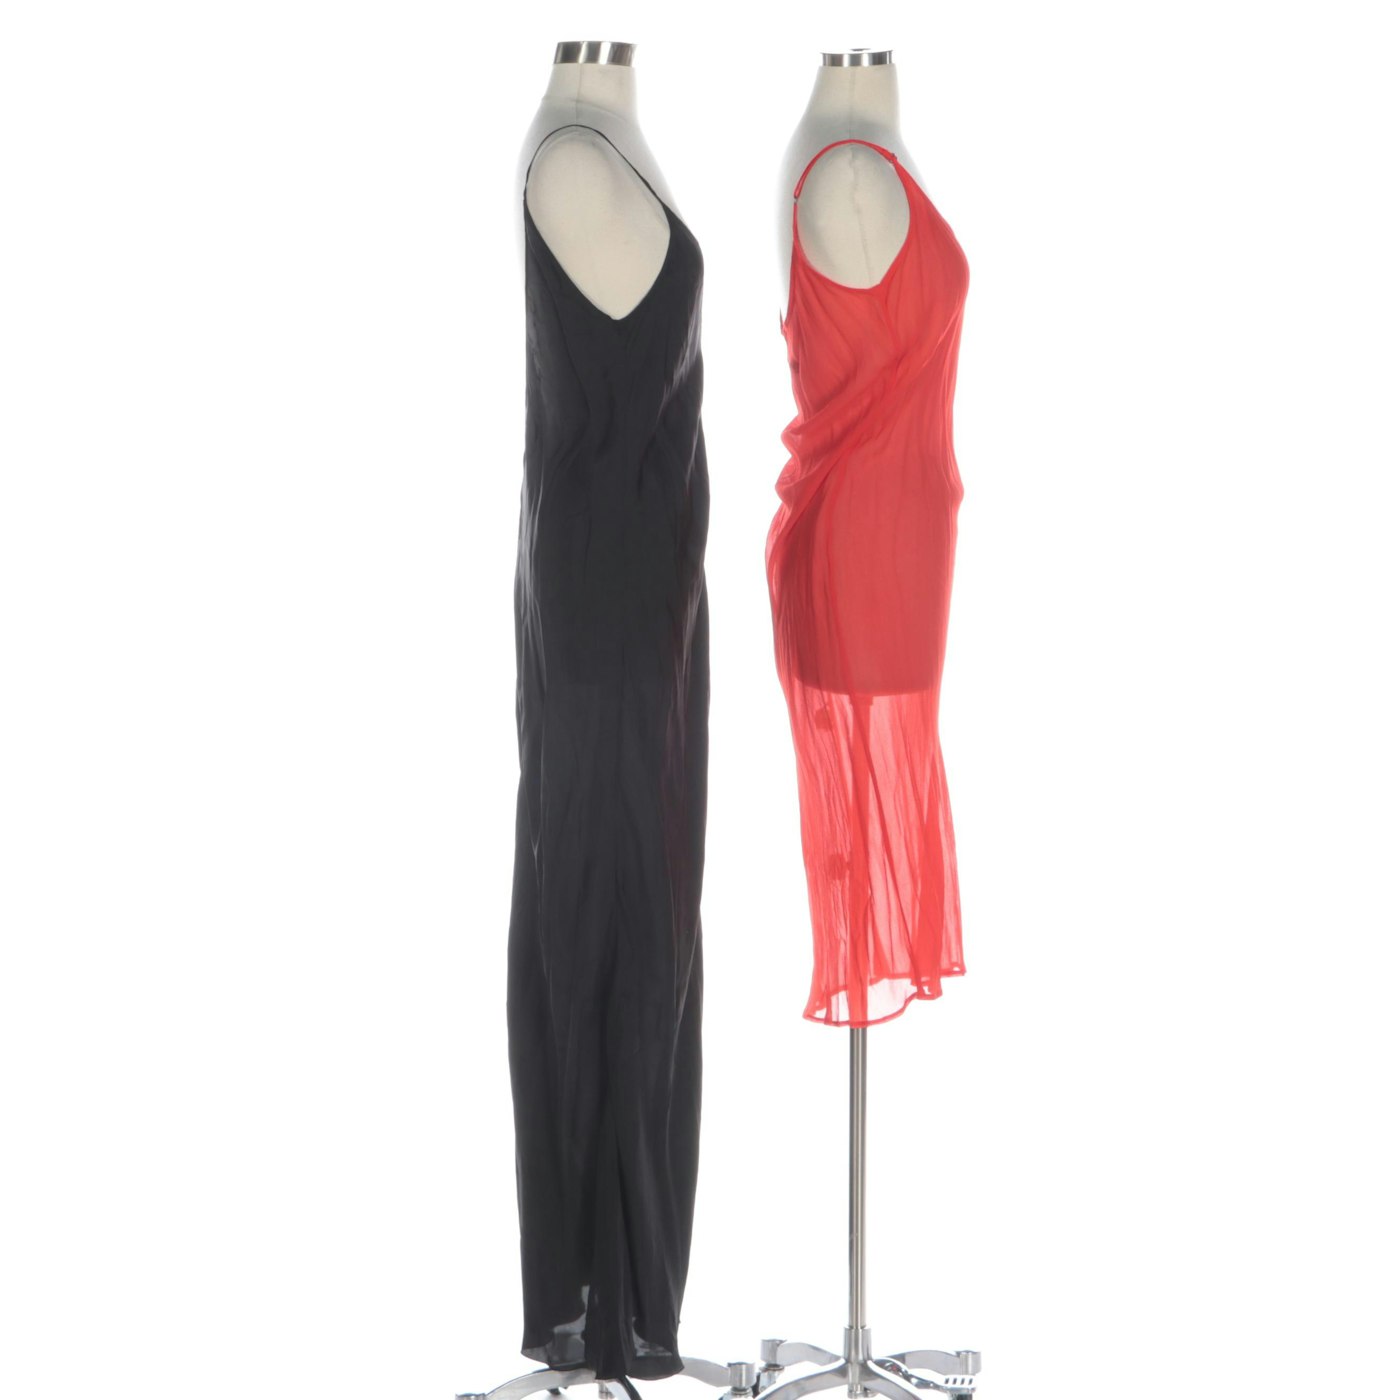 Enza Costa Red Sheer and Other Black Satin Finish Slip Dresses | EBTH